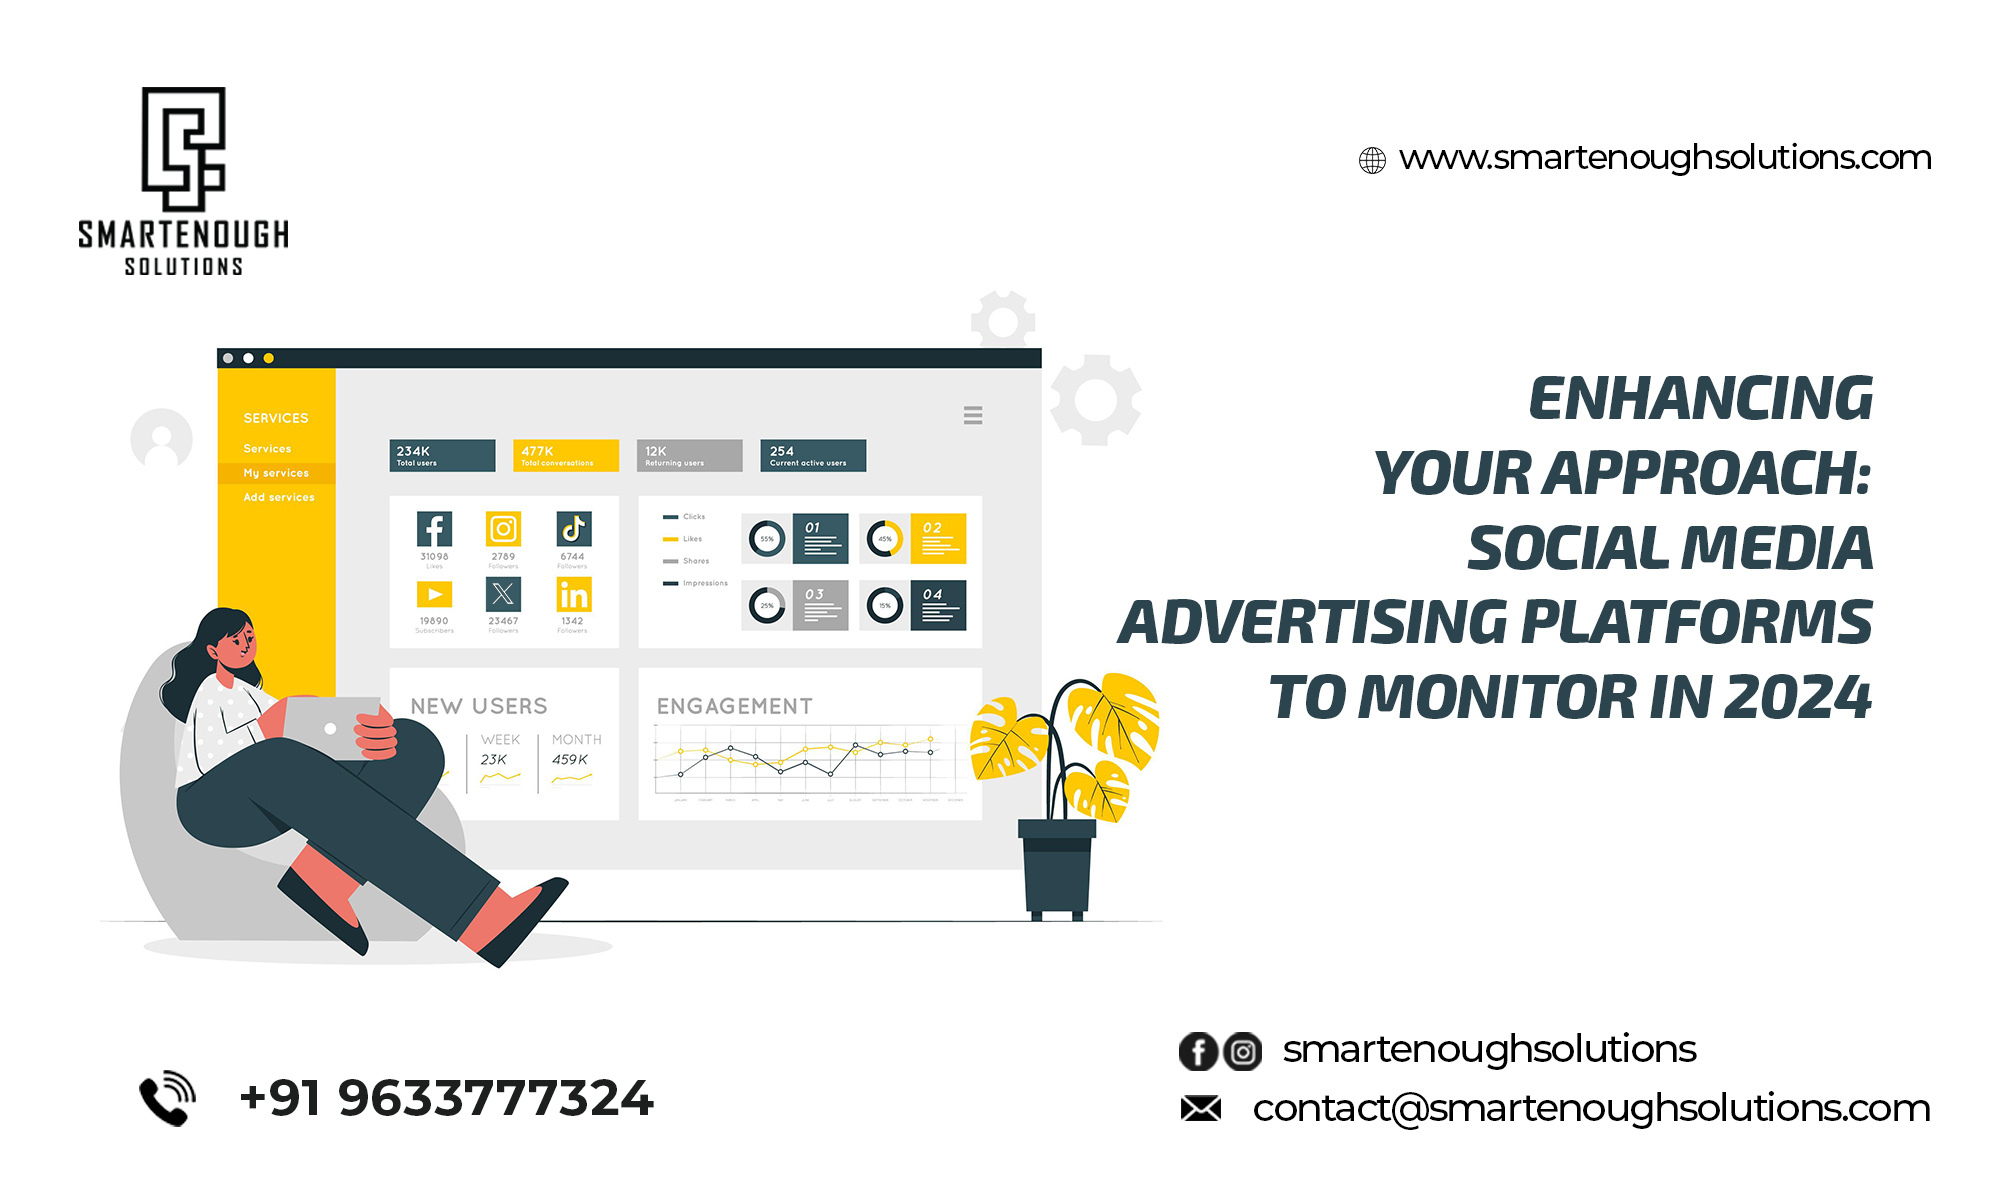 Enhancing Your Approach: Social Media Advertising Platforms to Monitor in 2024